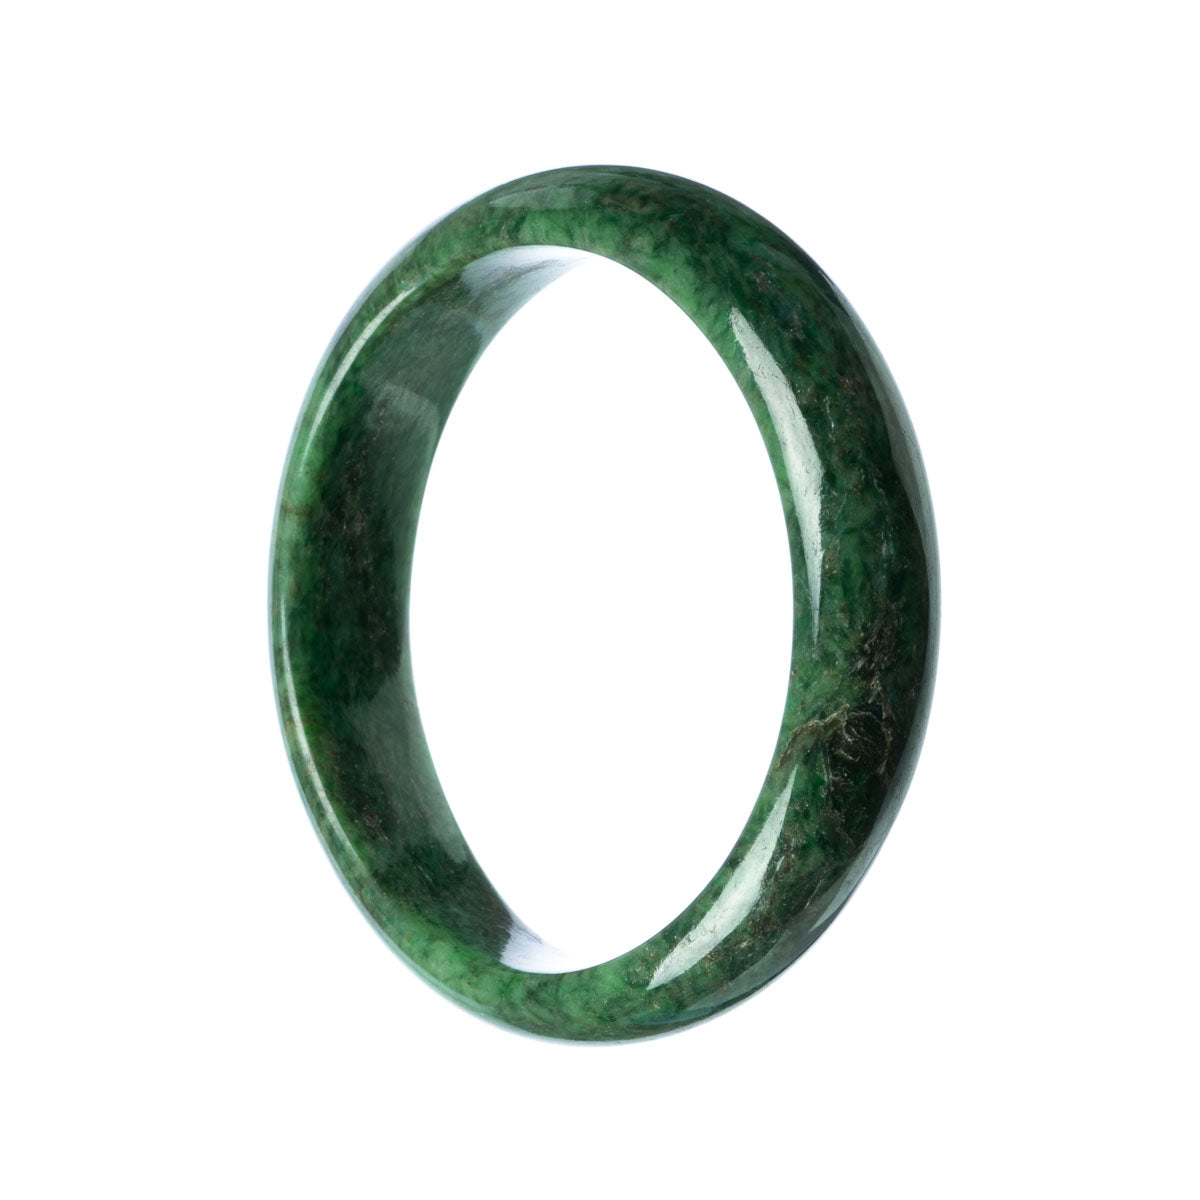 A beautiful half-moon shaped green jadeite bracelet, made from real natural jade.